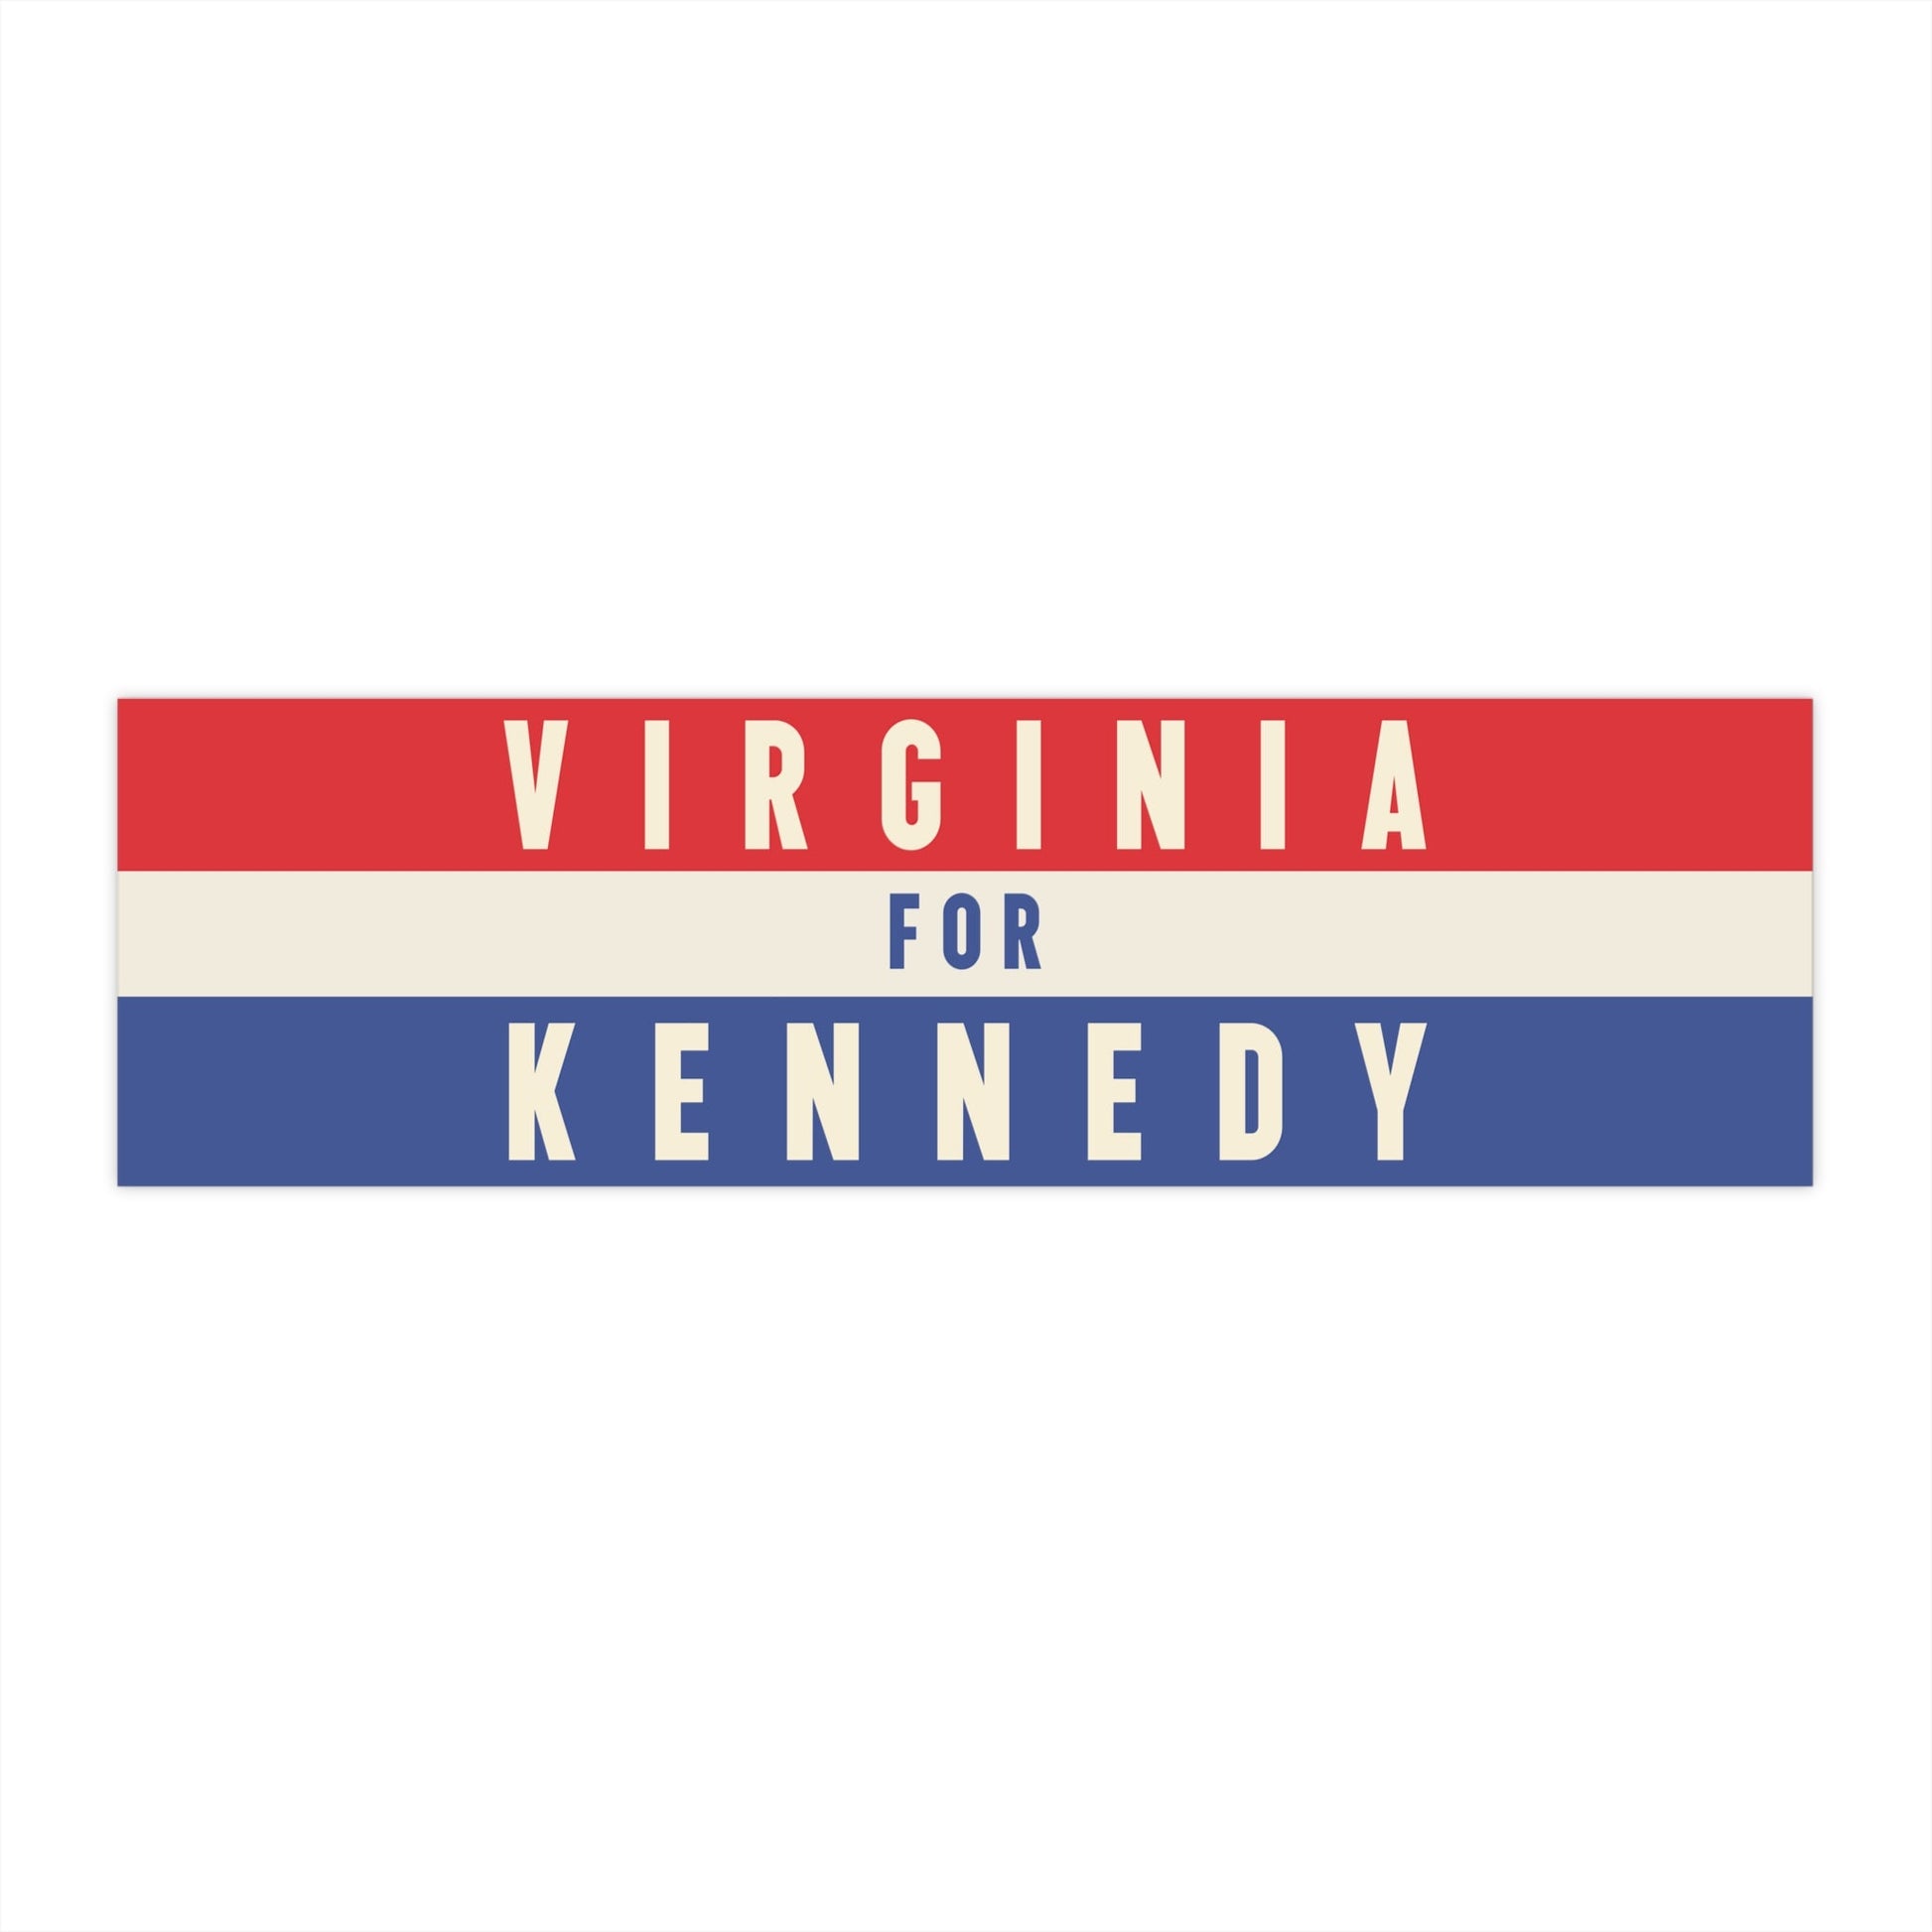 Virginia for Kennedy Bumper Sticker - TEAM KENNEDY. All rights reserved